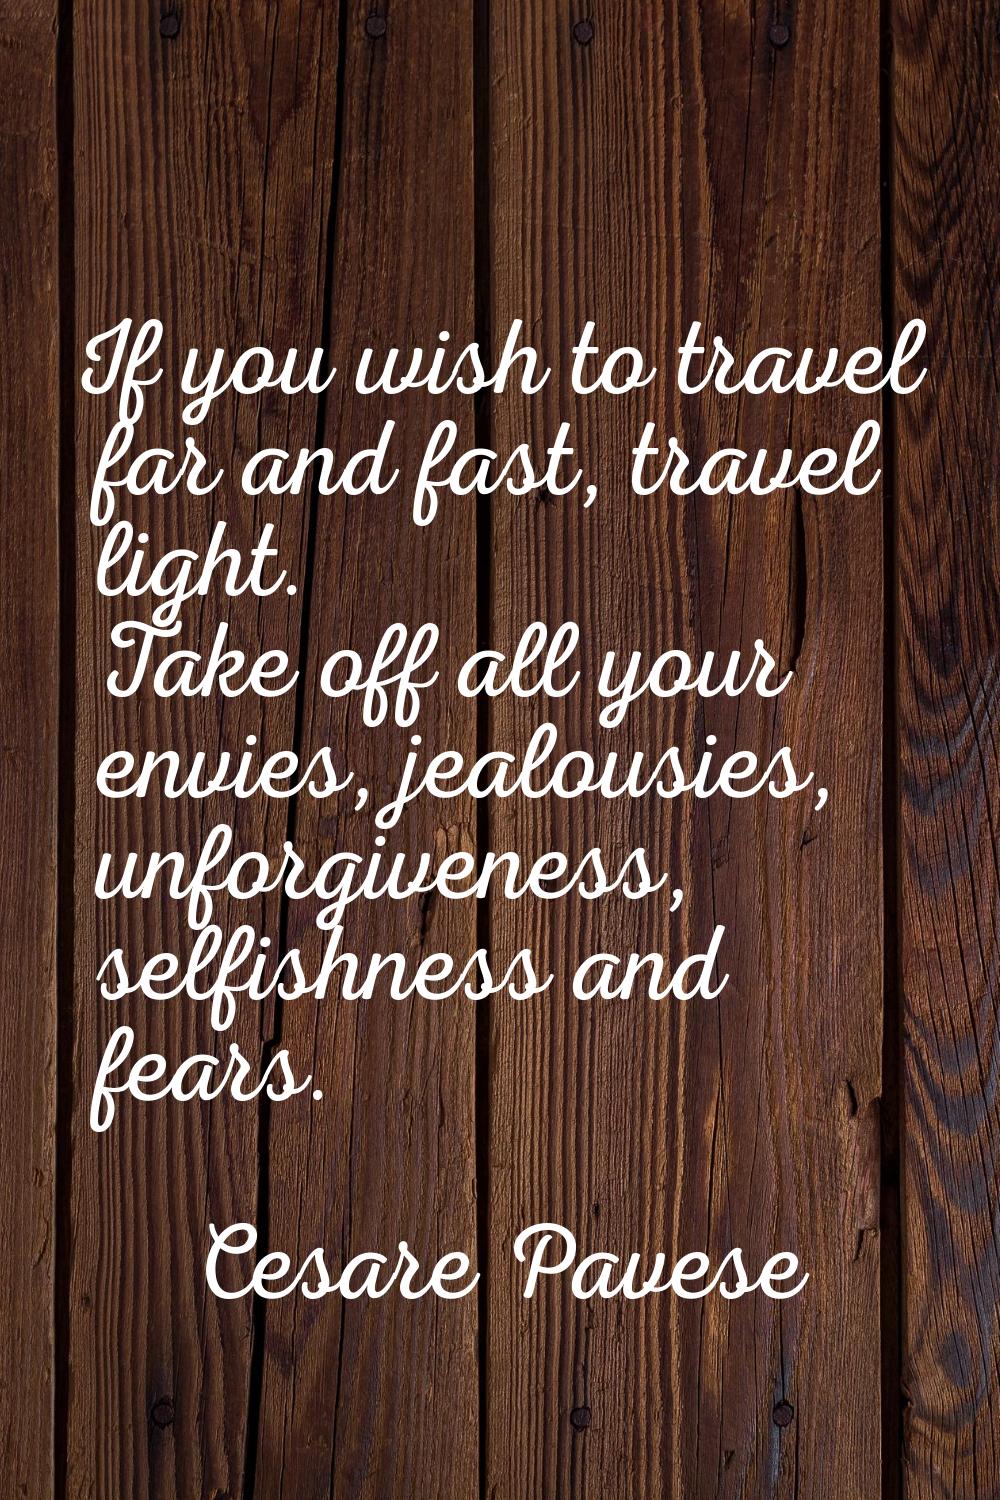 If you wish to travel far and fast, travel light. Take off all your envies, jealousies, unforgivene